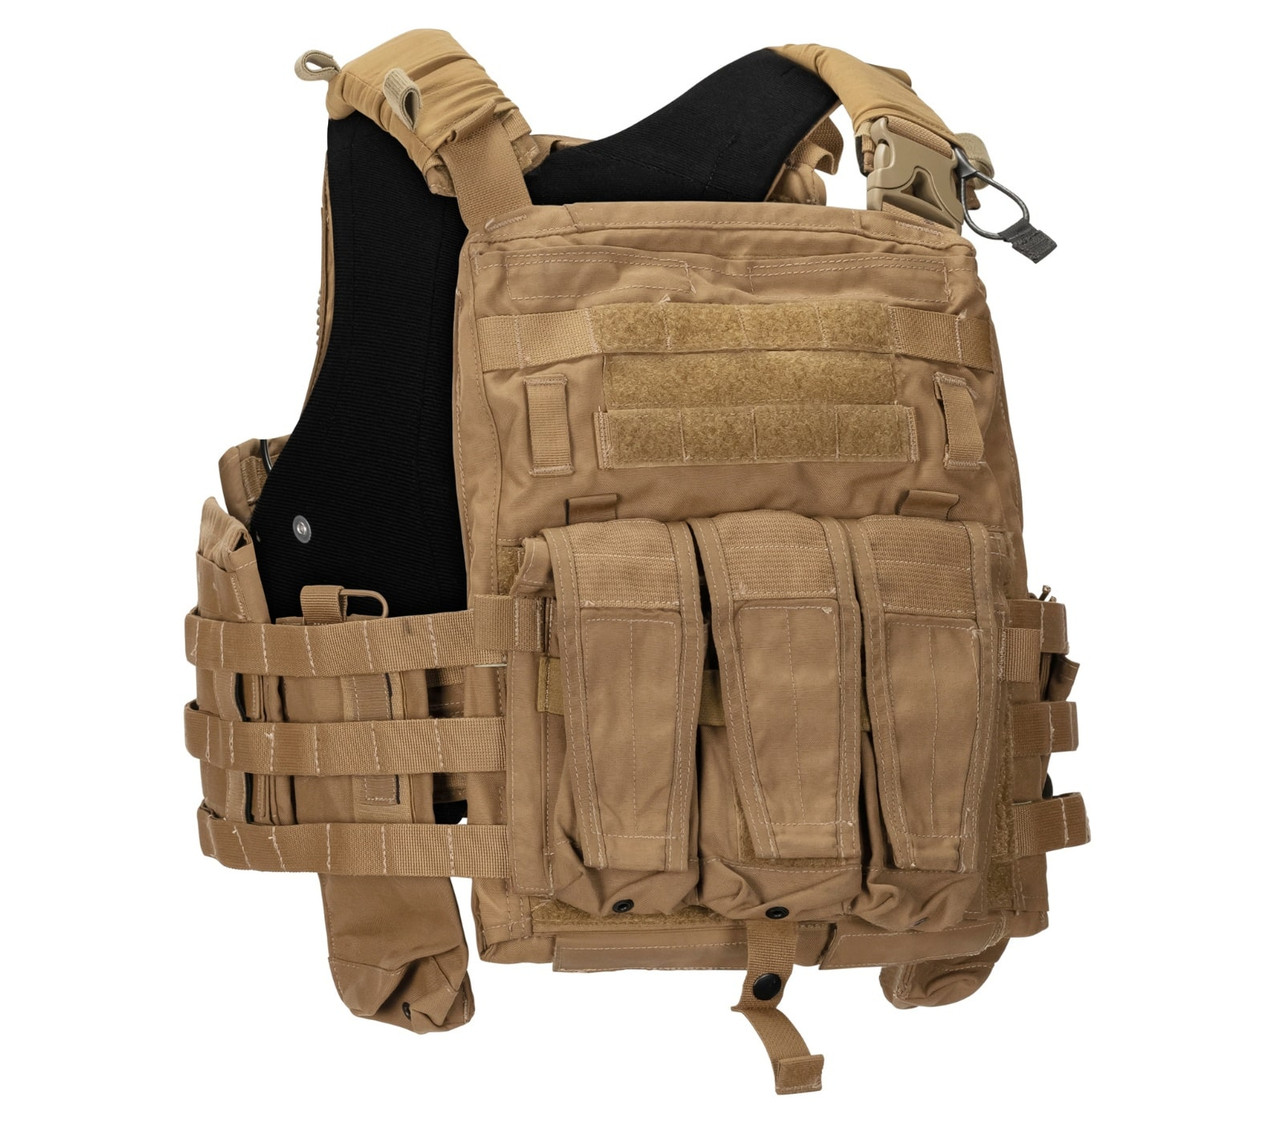 Crye Precision AVS MBAV Plate Carrier Tactical Vest | Military Surplus Used